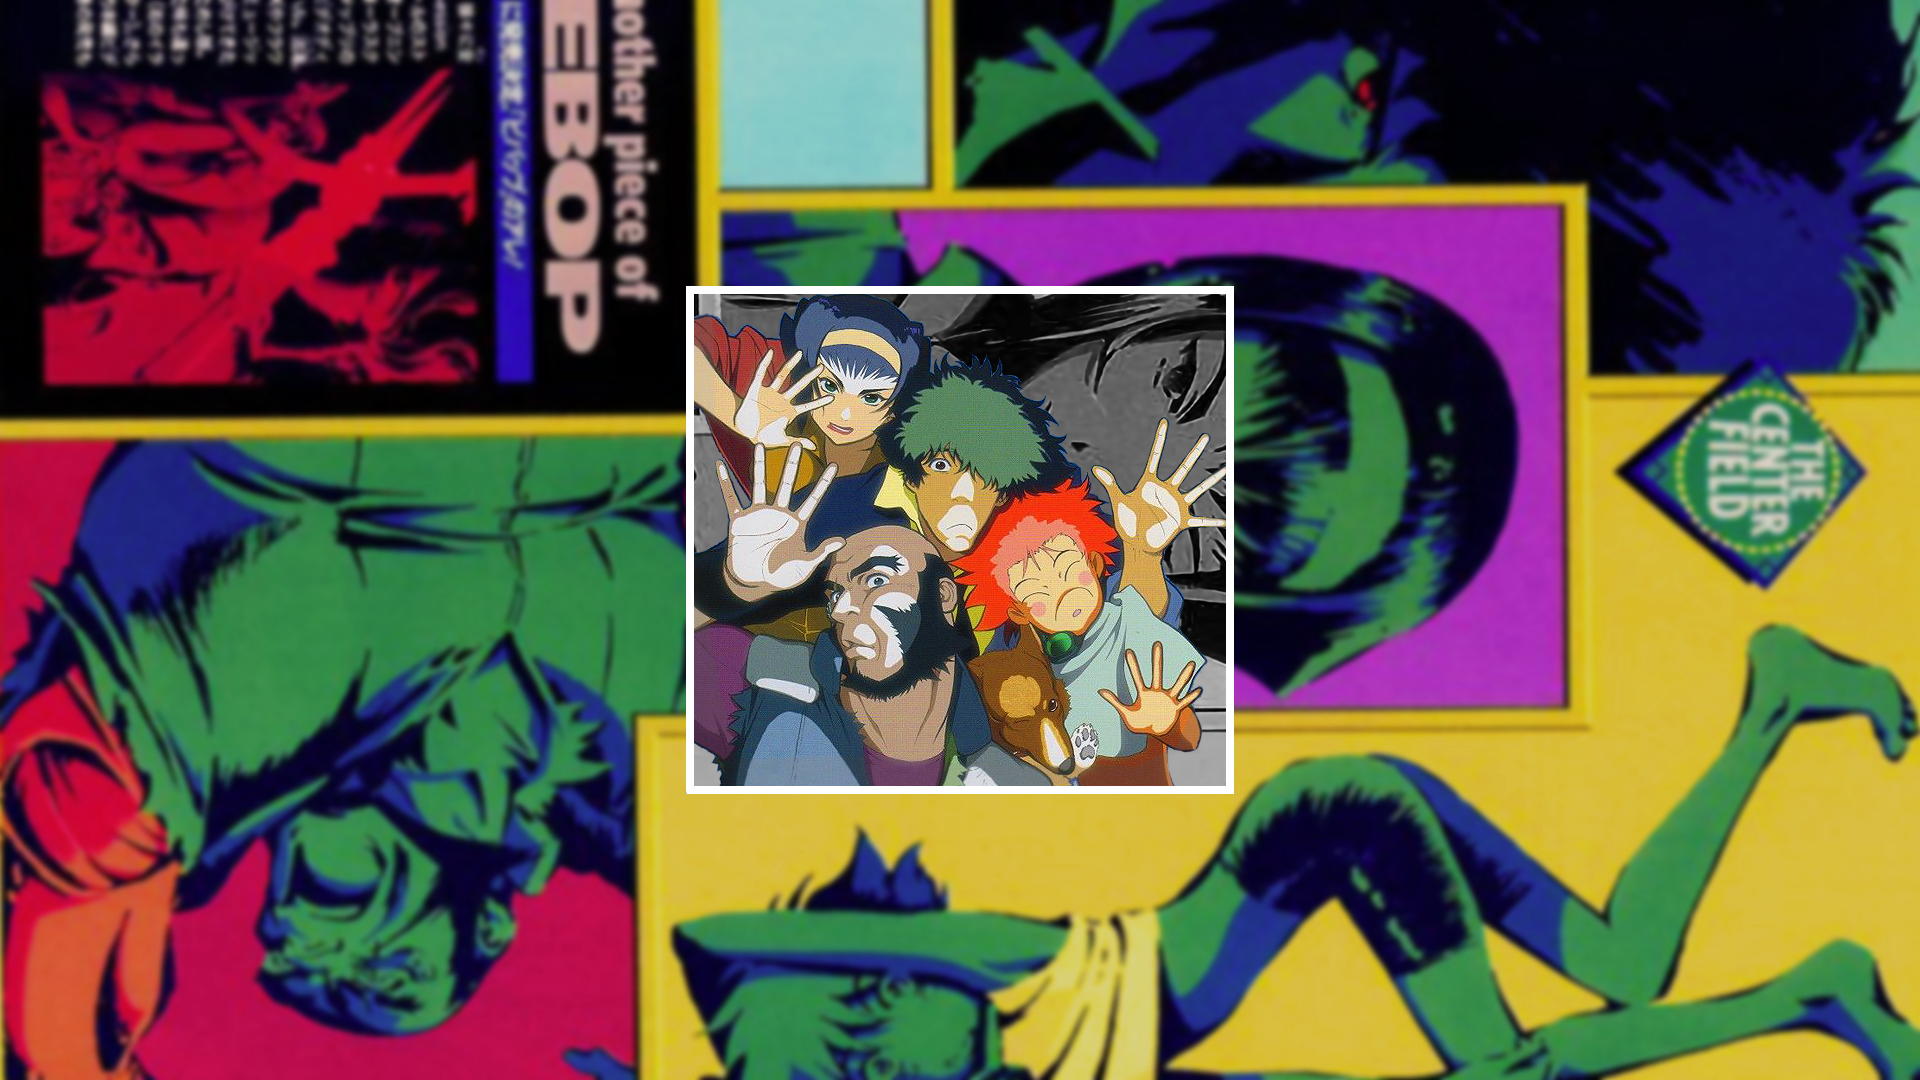 Anime 1920x1080 Cowboy Bebop Spike Spiegel Faye Valentine picture-in-picture picture